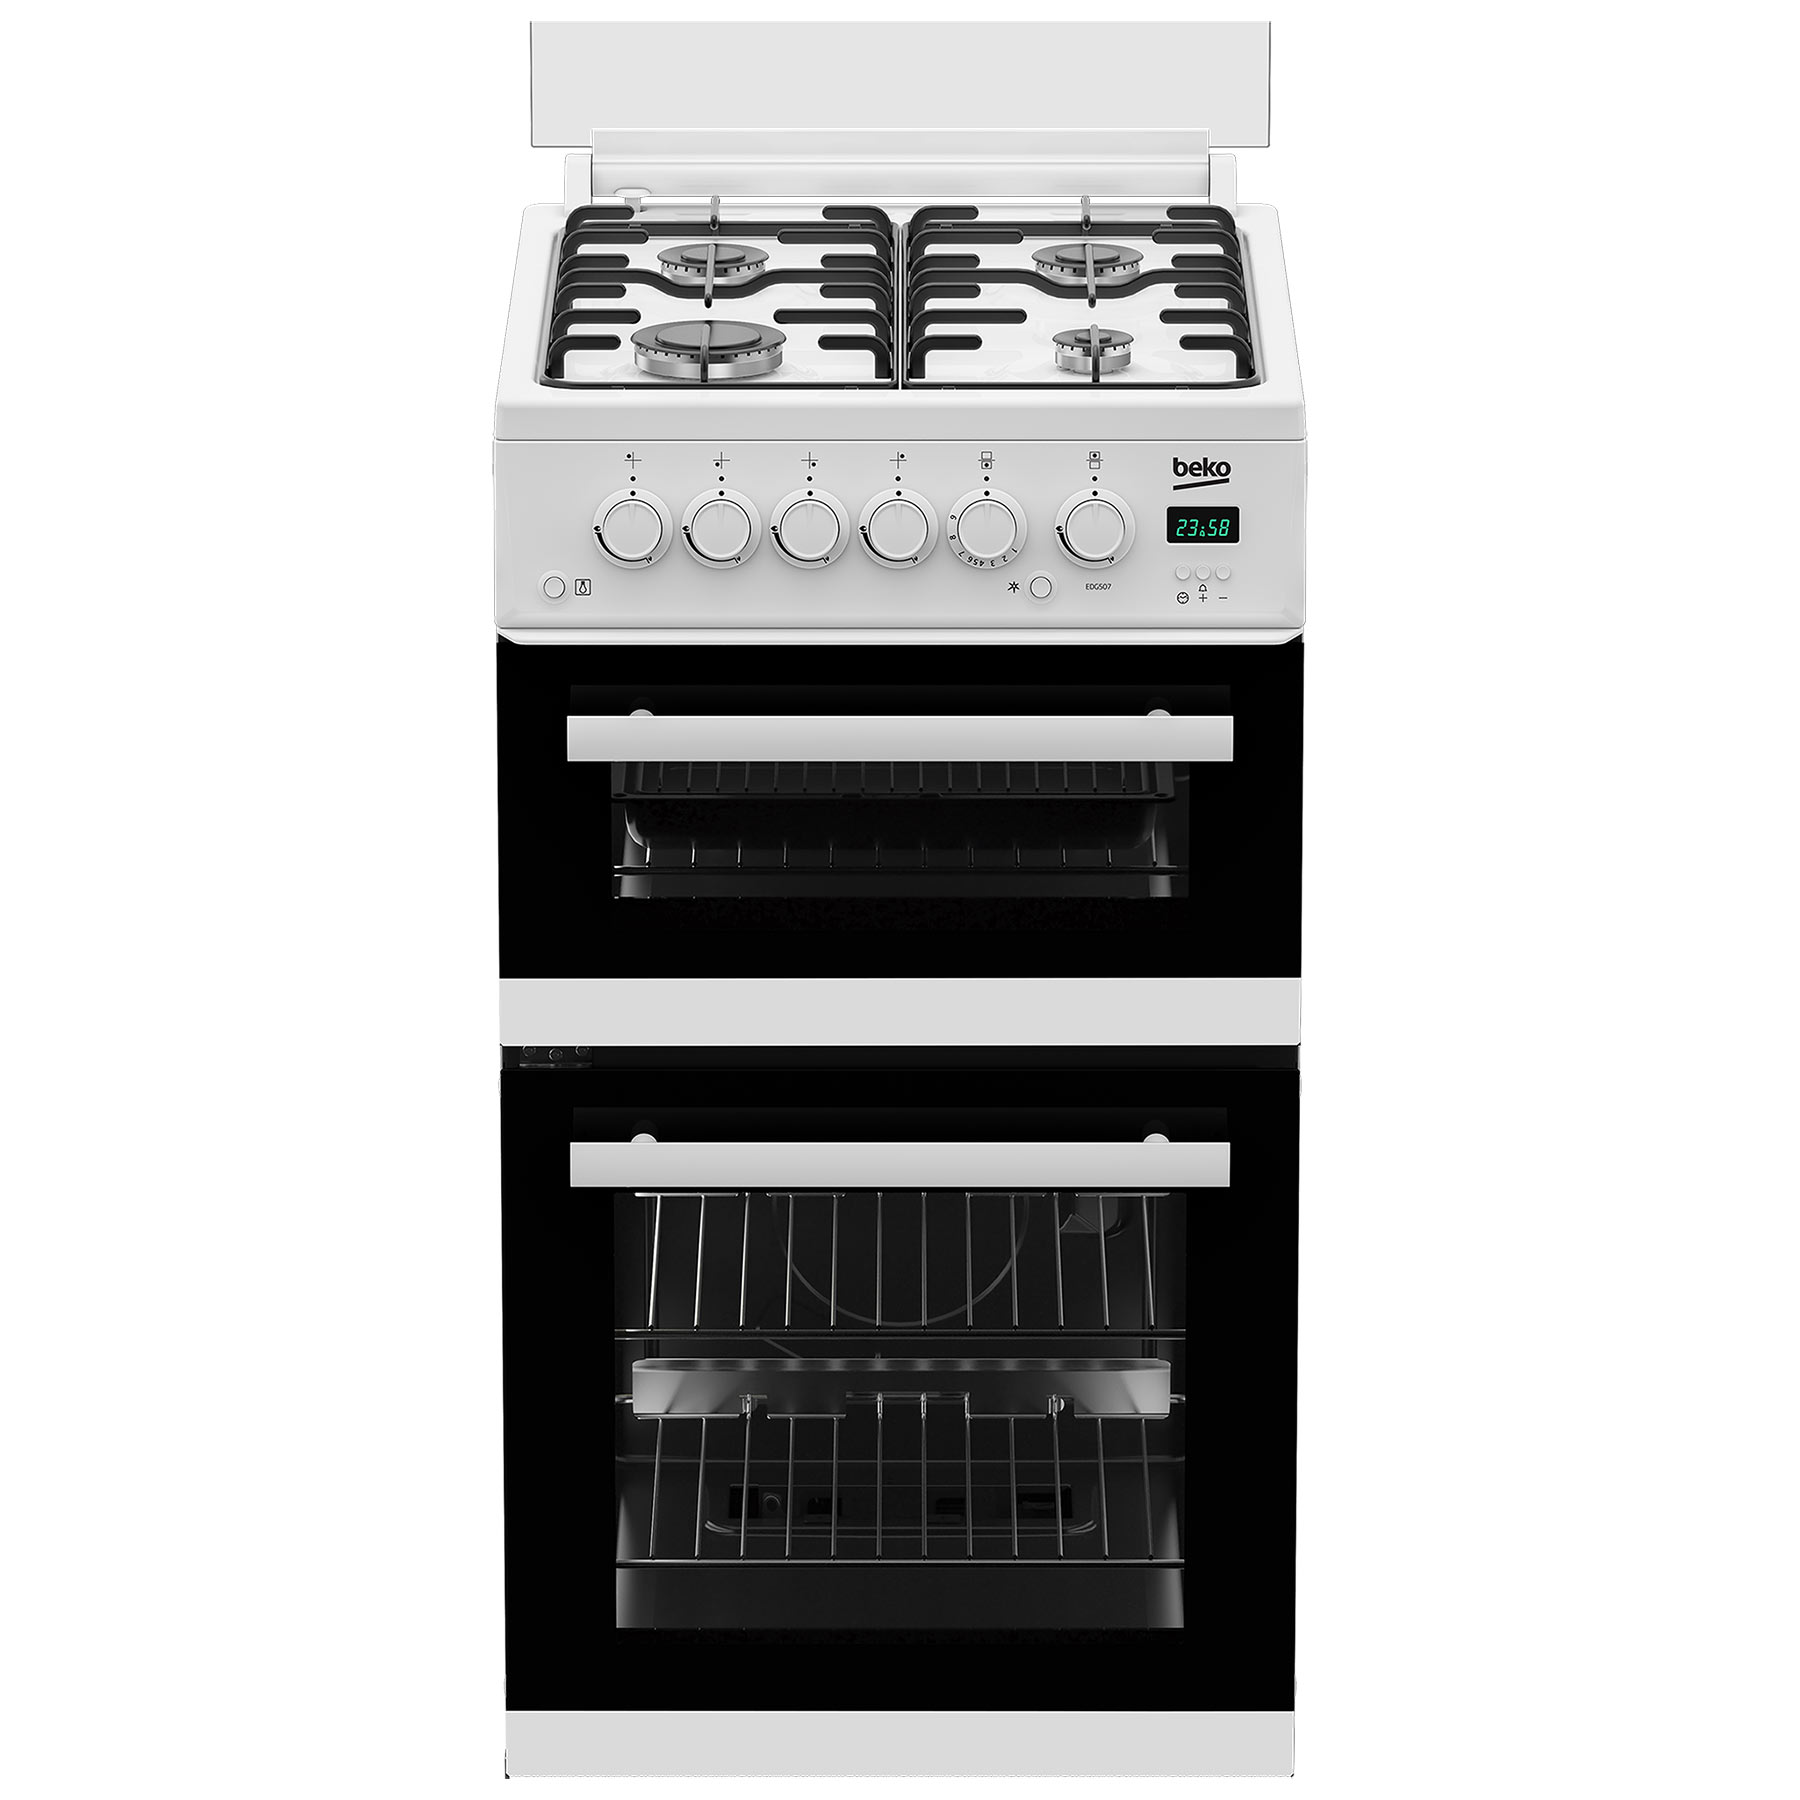 Image of Beko EDG507W 50cm Twin Cavity Gas Cooker in White